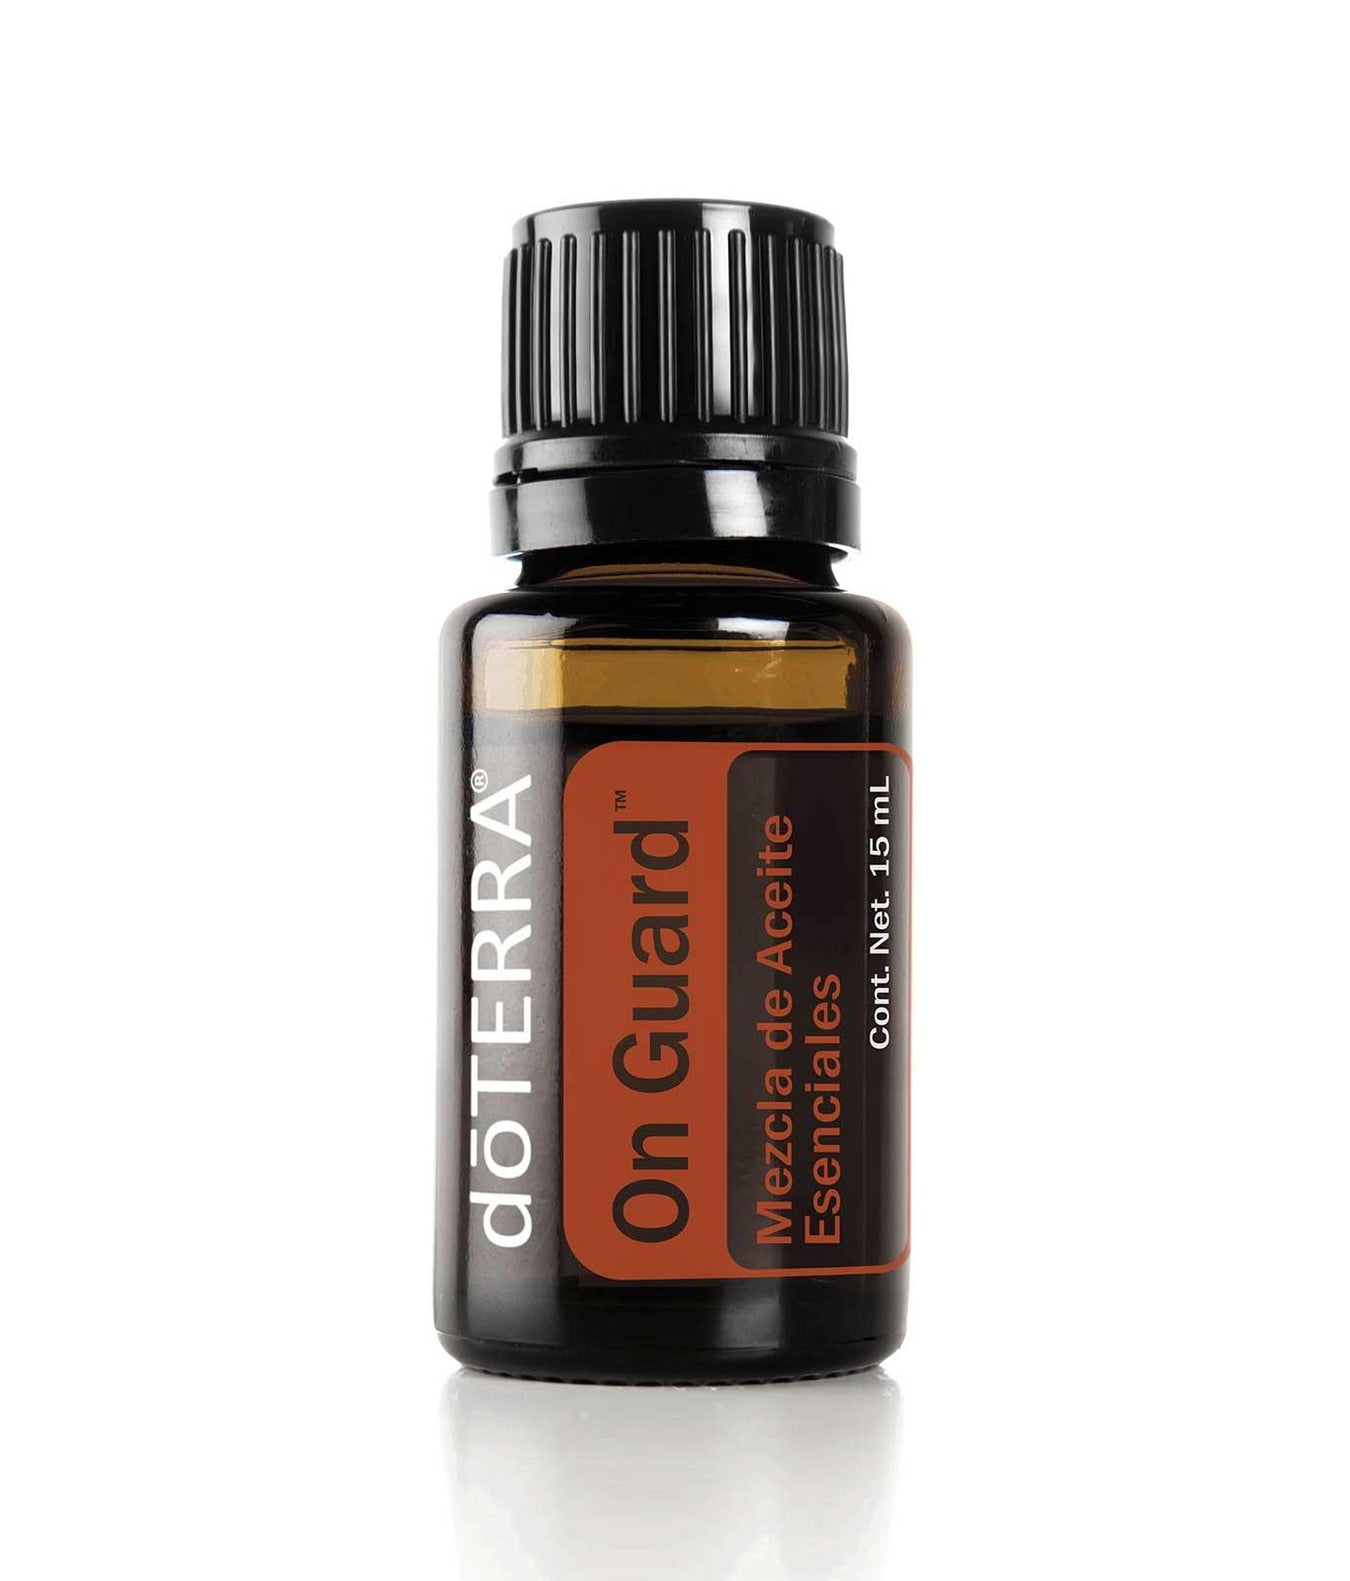 Productos On Guard® by dōTERRA